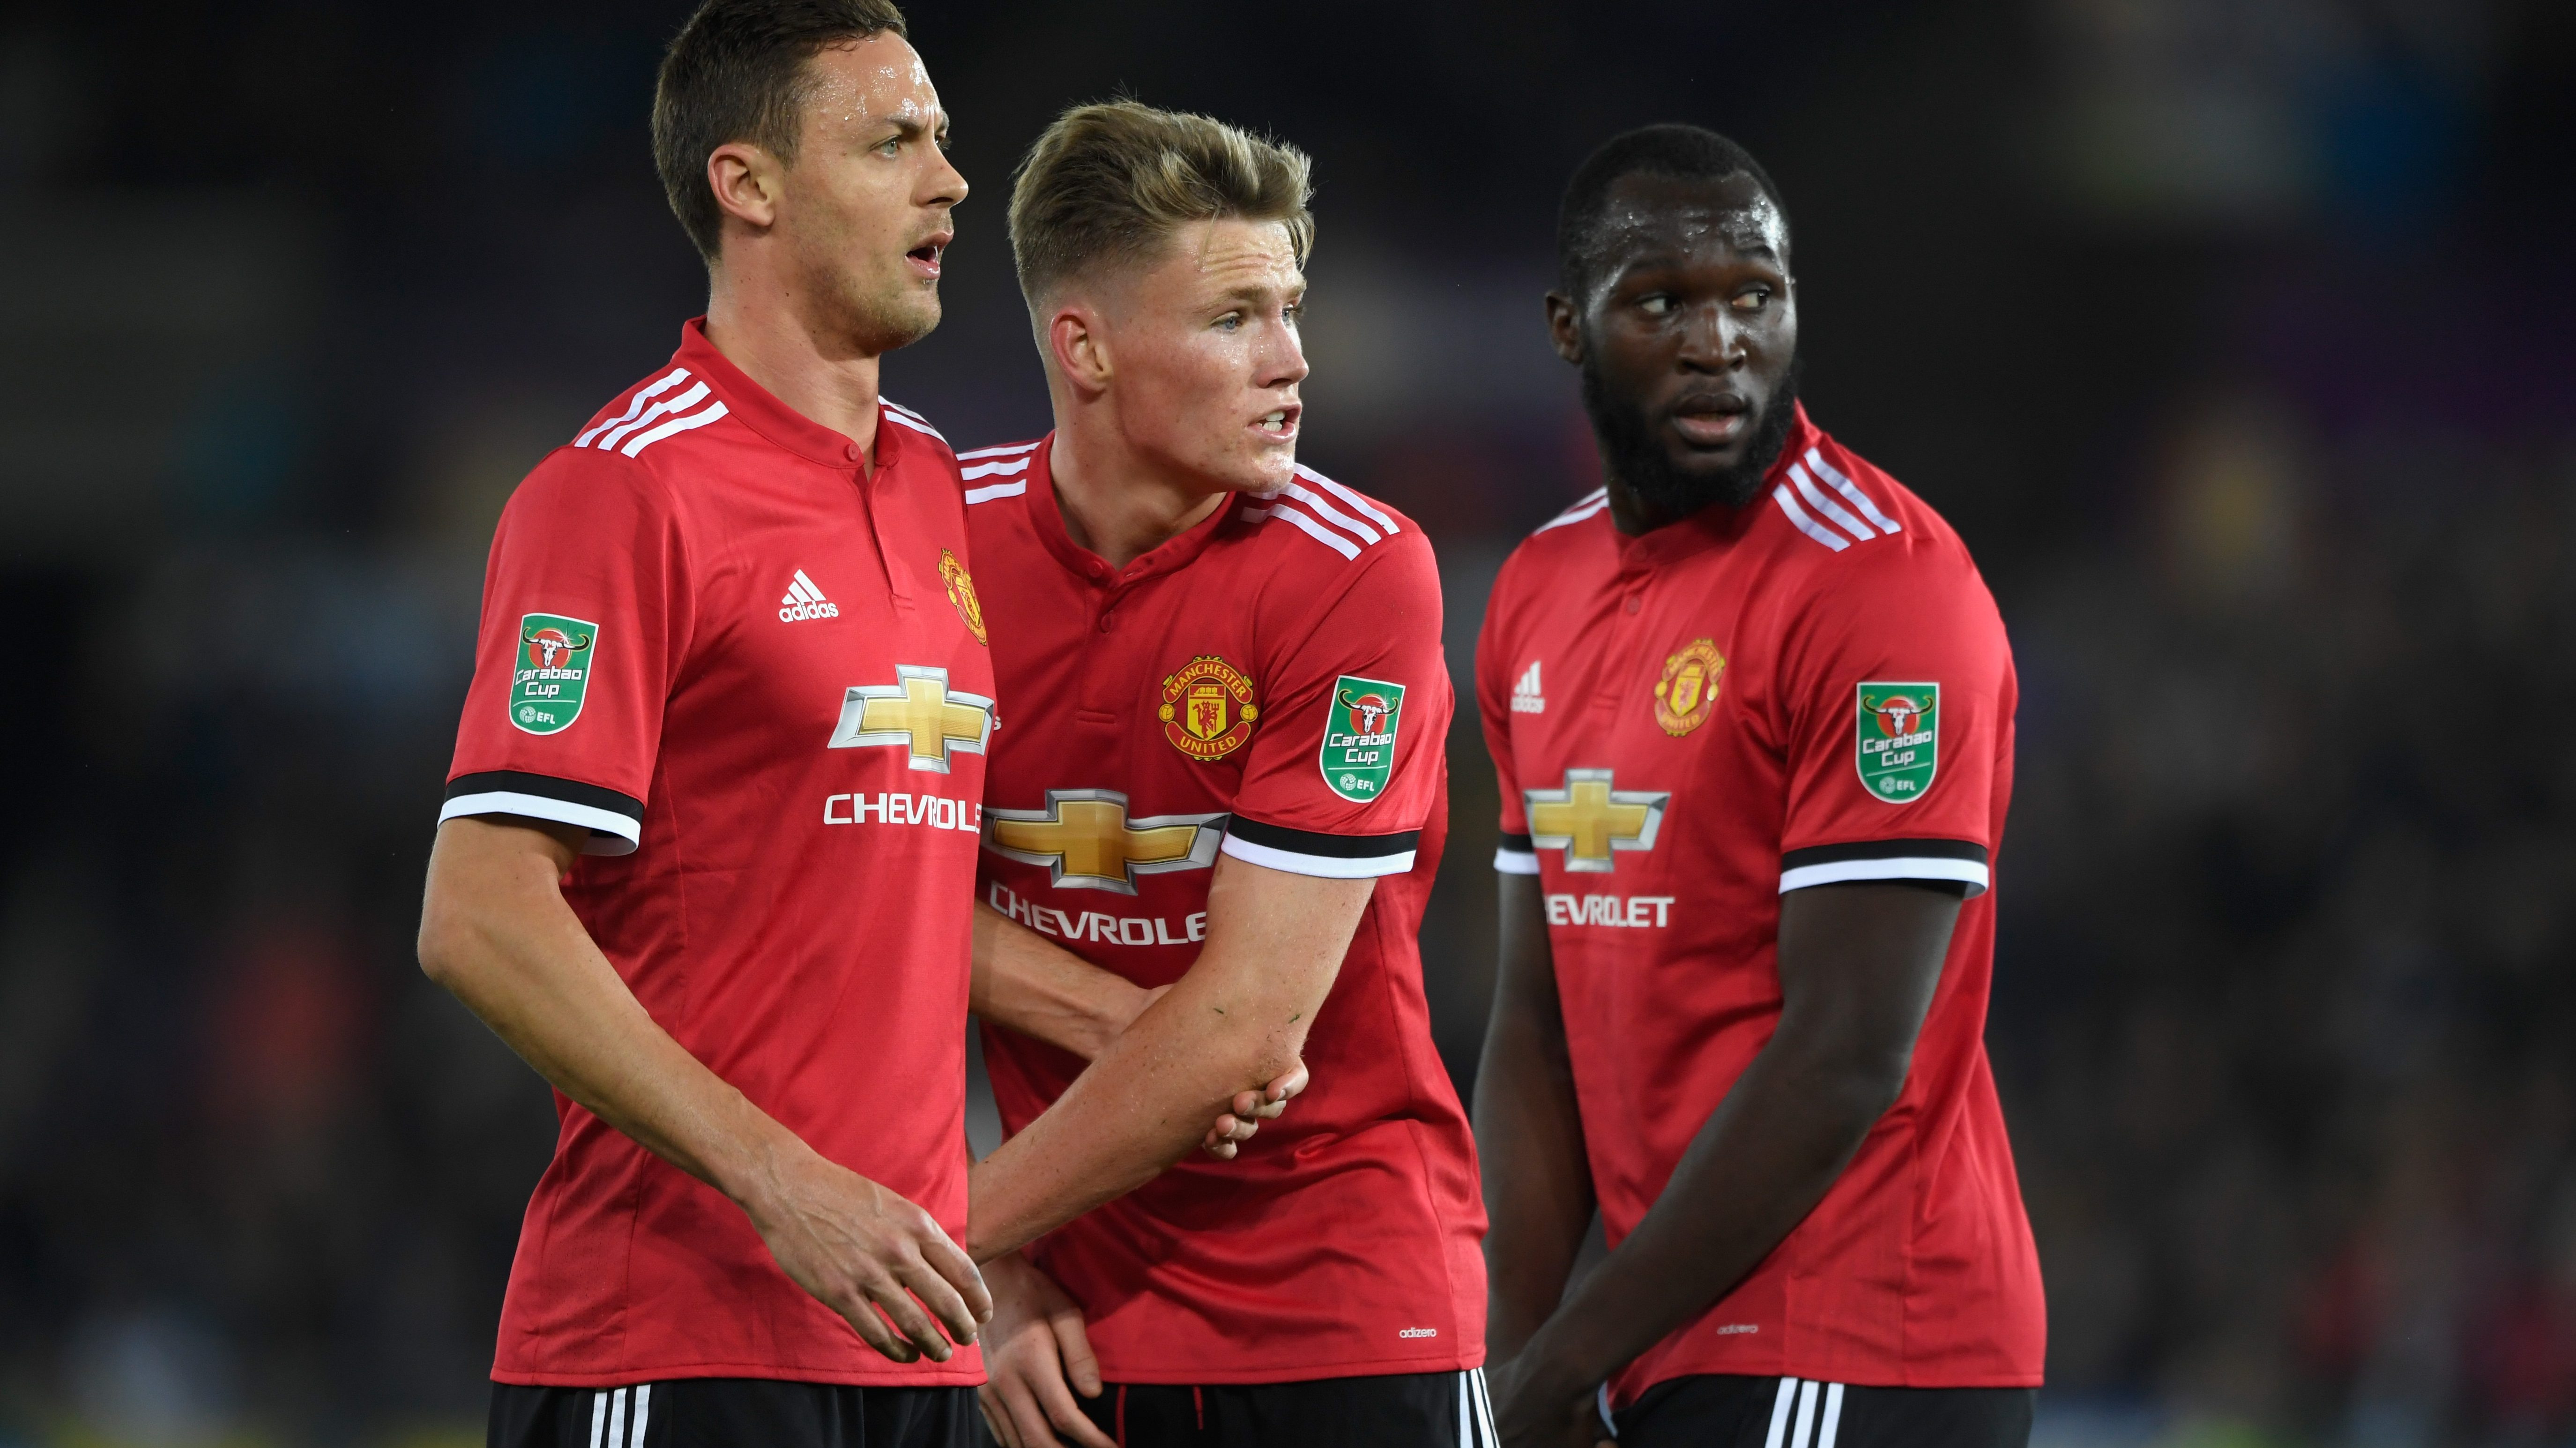 Man United vs Spurs Live Stream: How to Watch for Free | Heavy.com